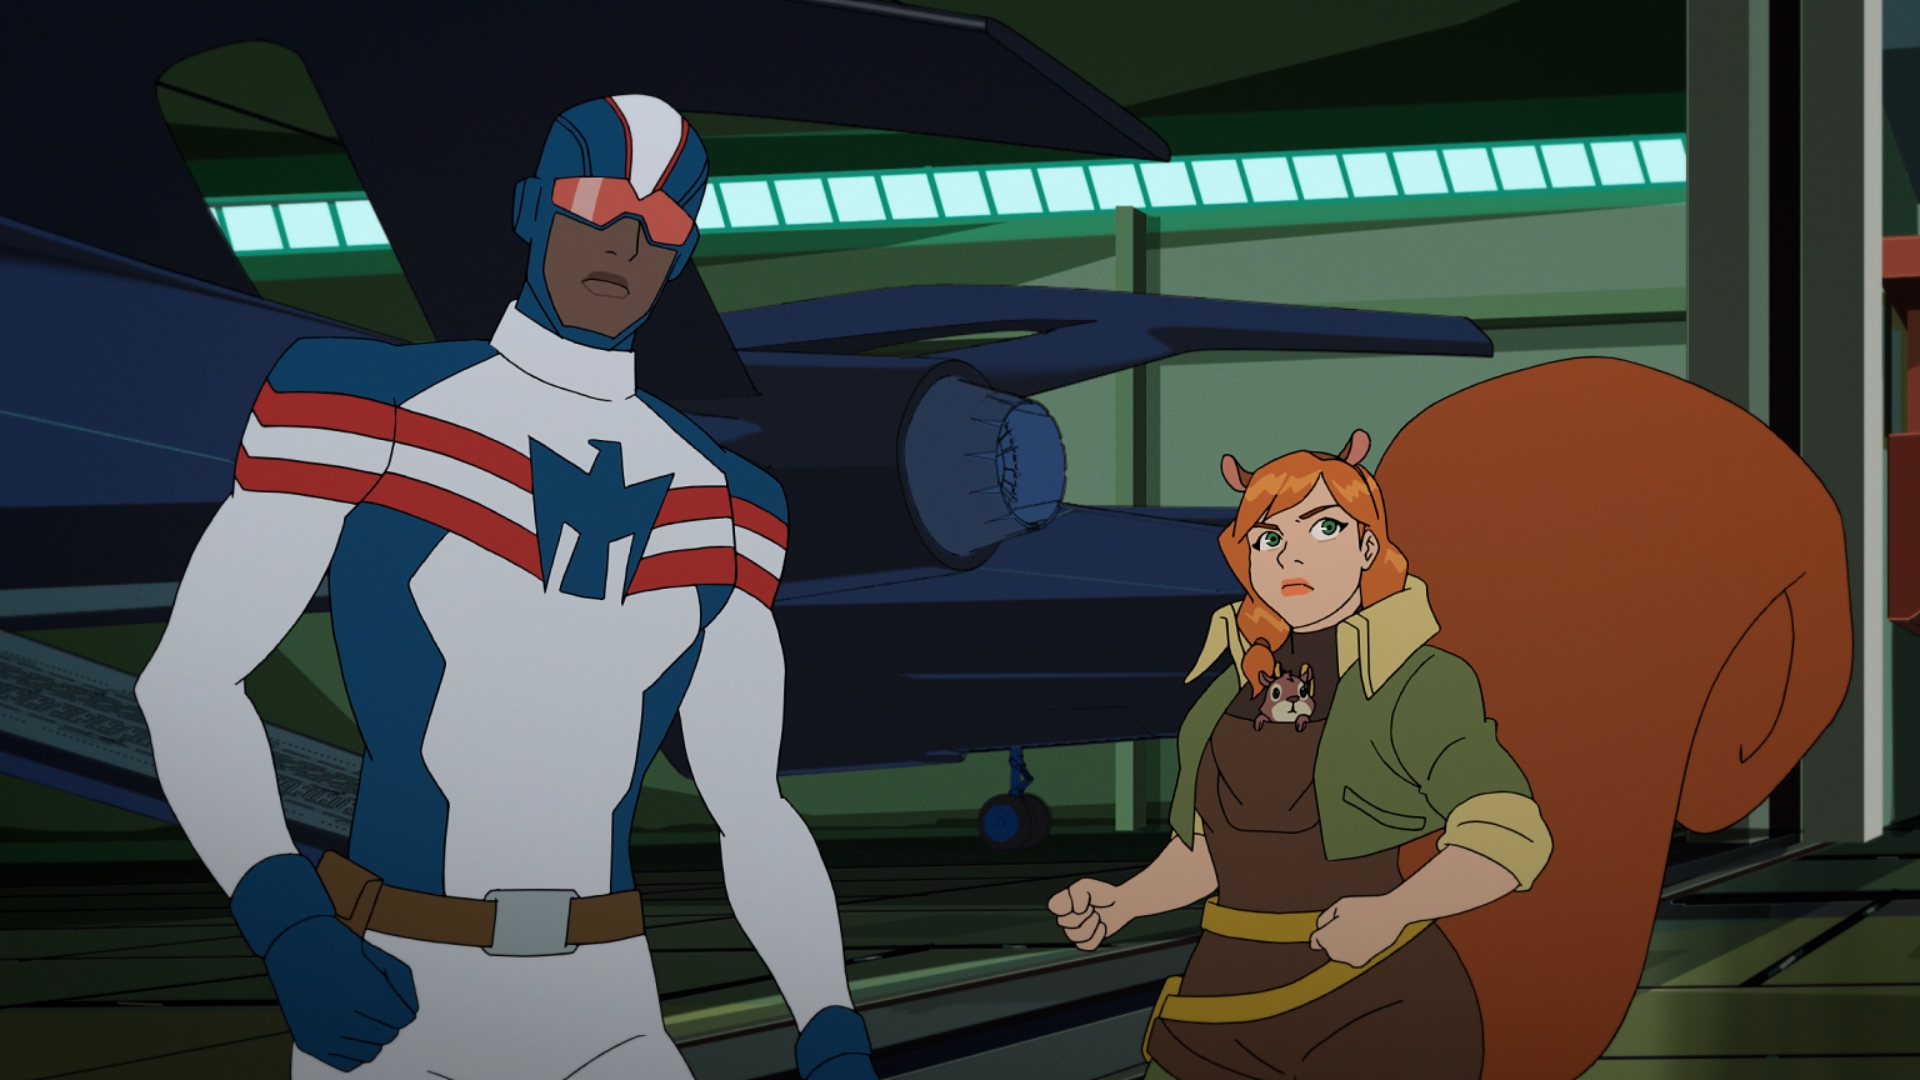 Patriot, Tippy-Toe, and Squirrel Girl in 'Marvel Rising: Secret Warriors'